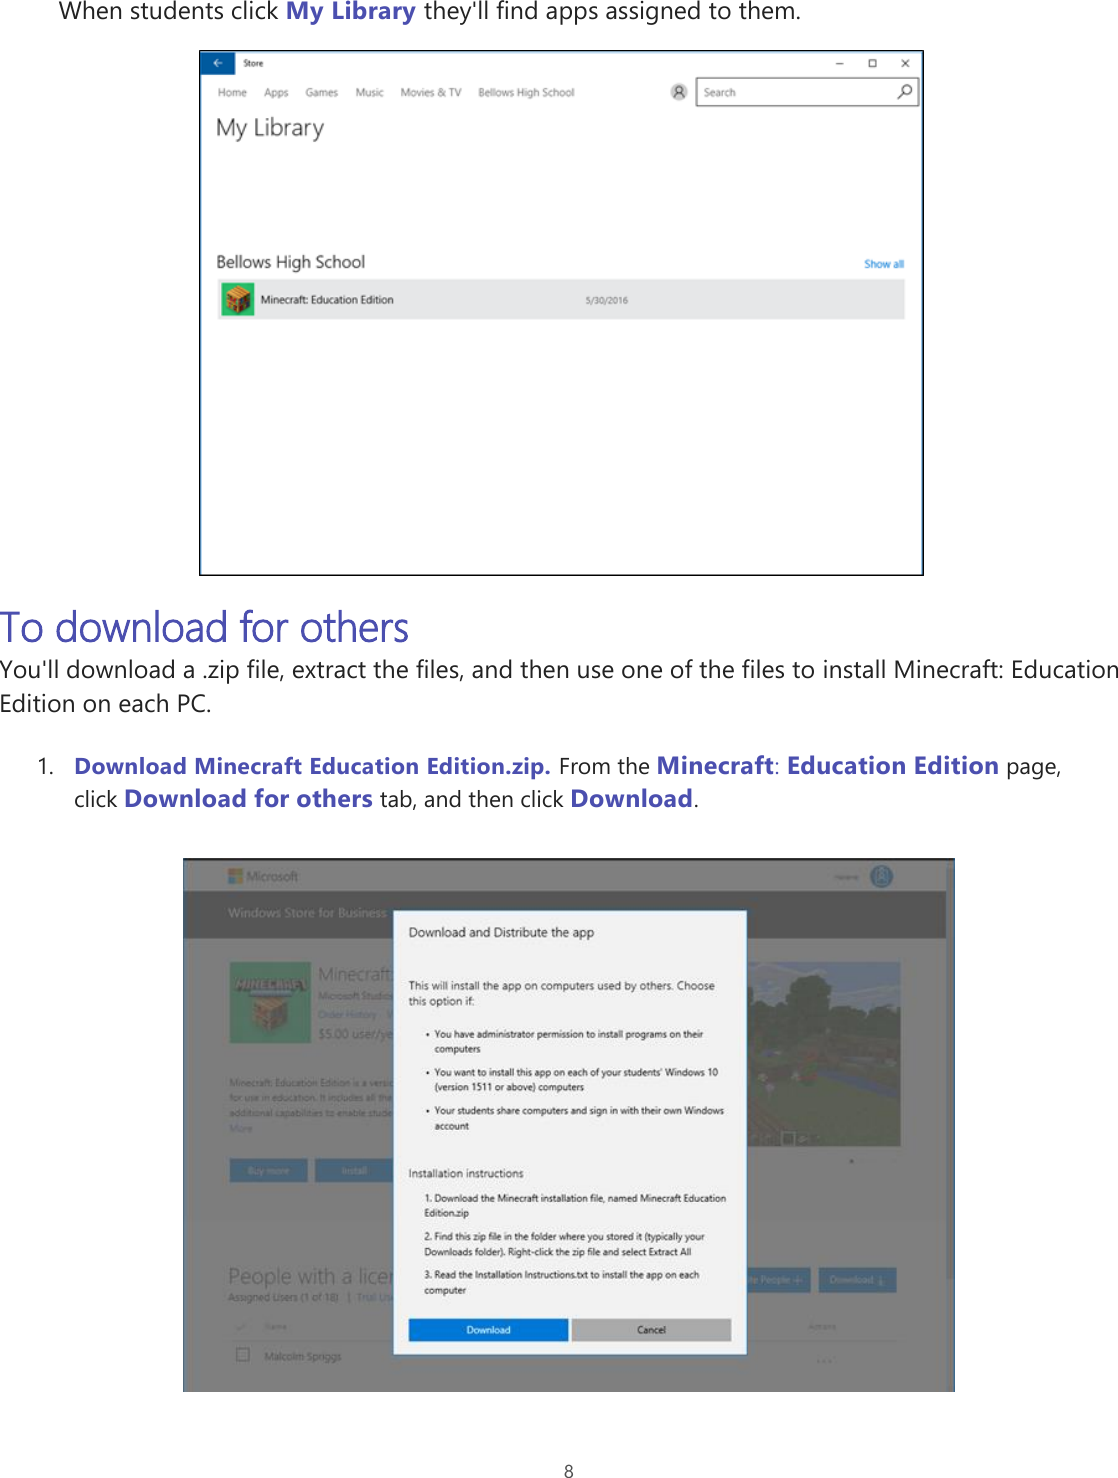 Page 8 of 11 - Microsoft Teams Team Leader Getting Started Guide MEE Educator Deployment